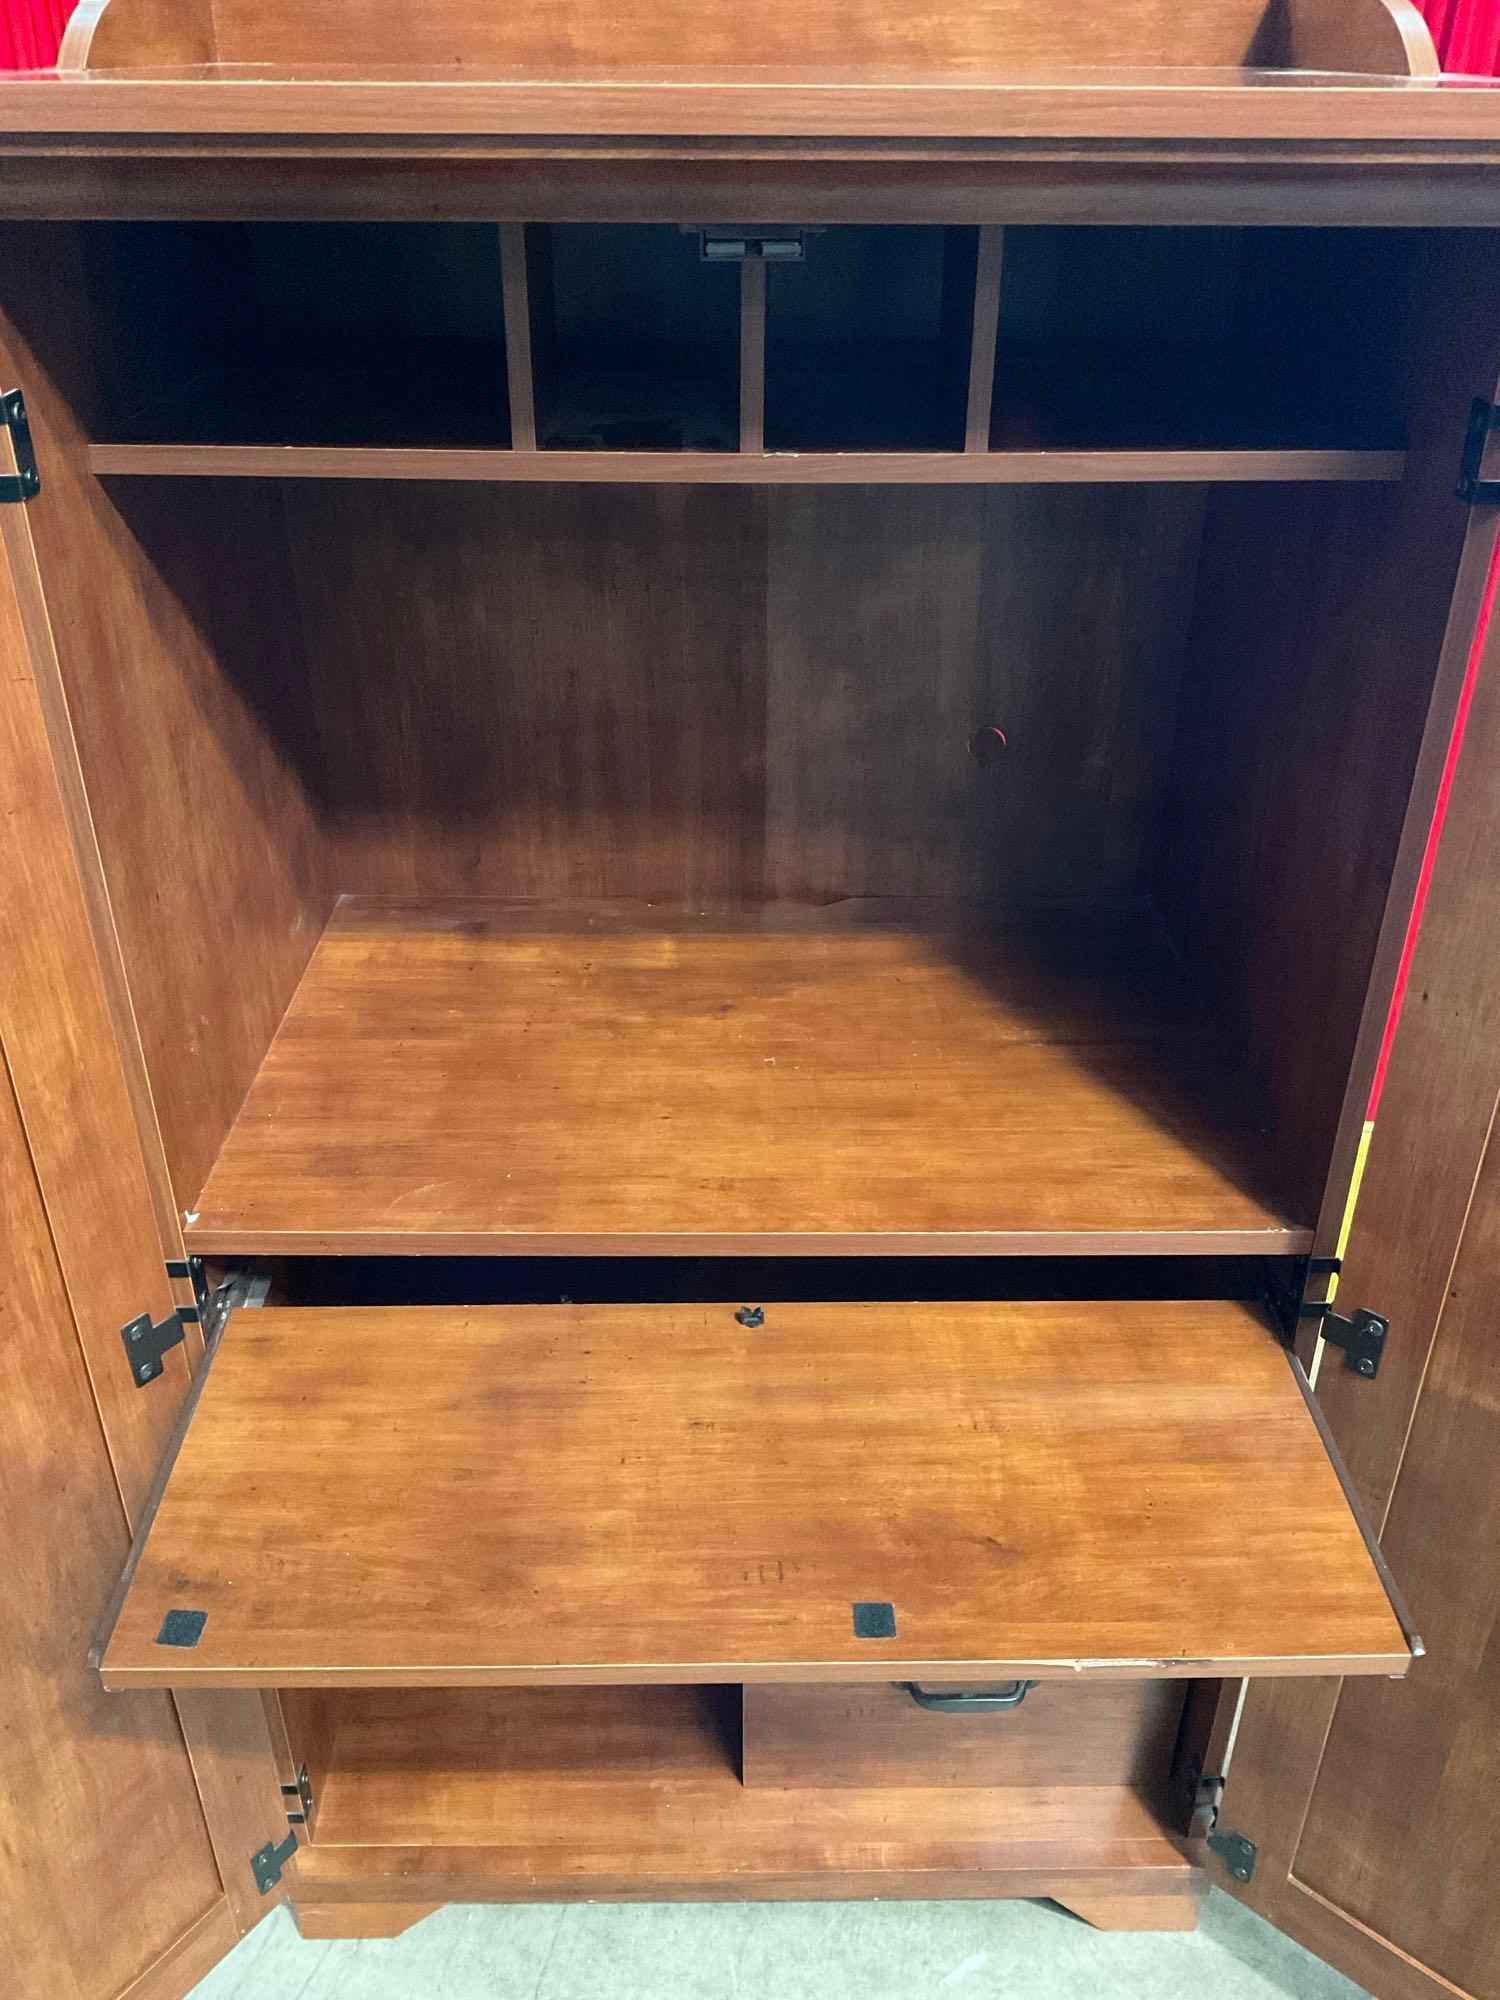 Modern Sauder Wooden Media Cabinet w/ Pull Out Shelf, 6 Compartments & 1 Drawer. See pics.